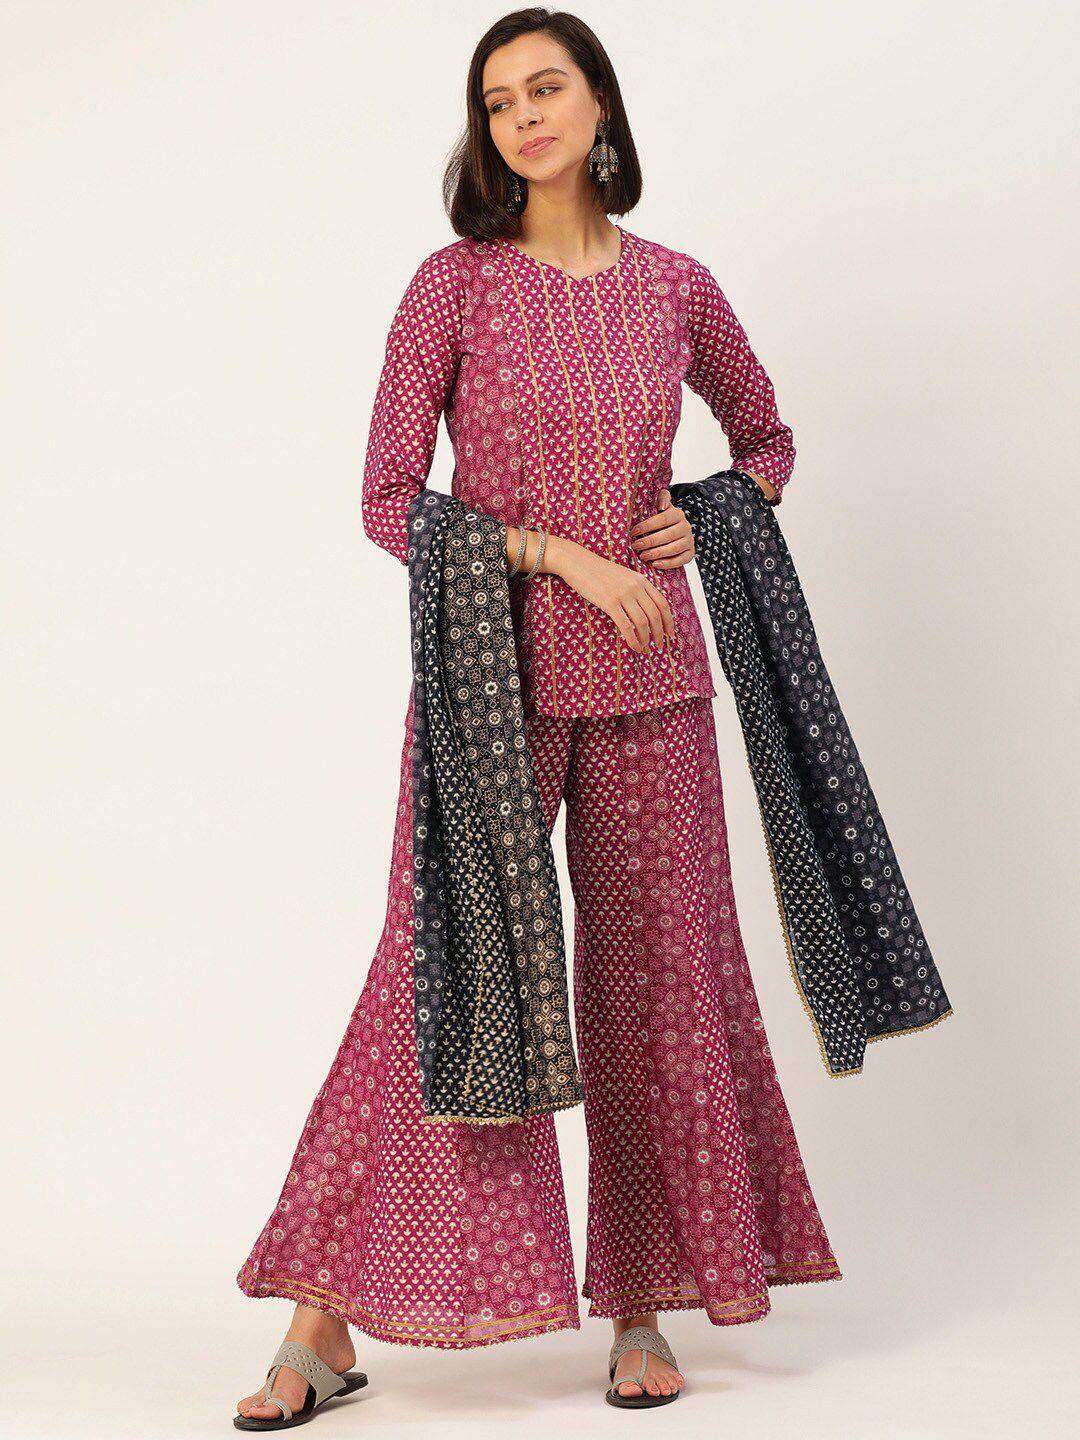 here&now women pink and black ethnic printed pure cotton kurti with palazzo and dupatta